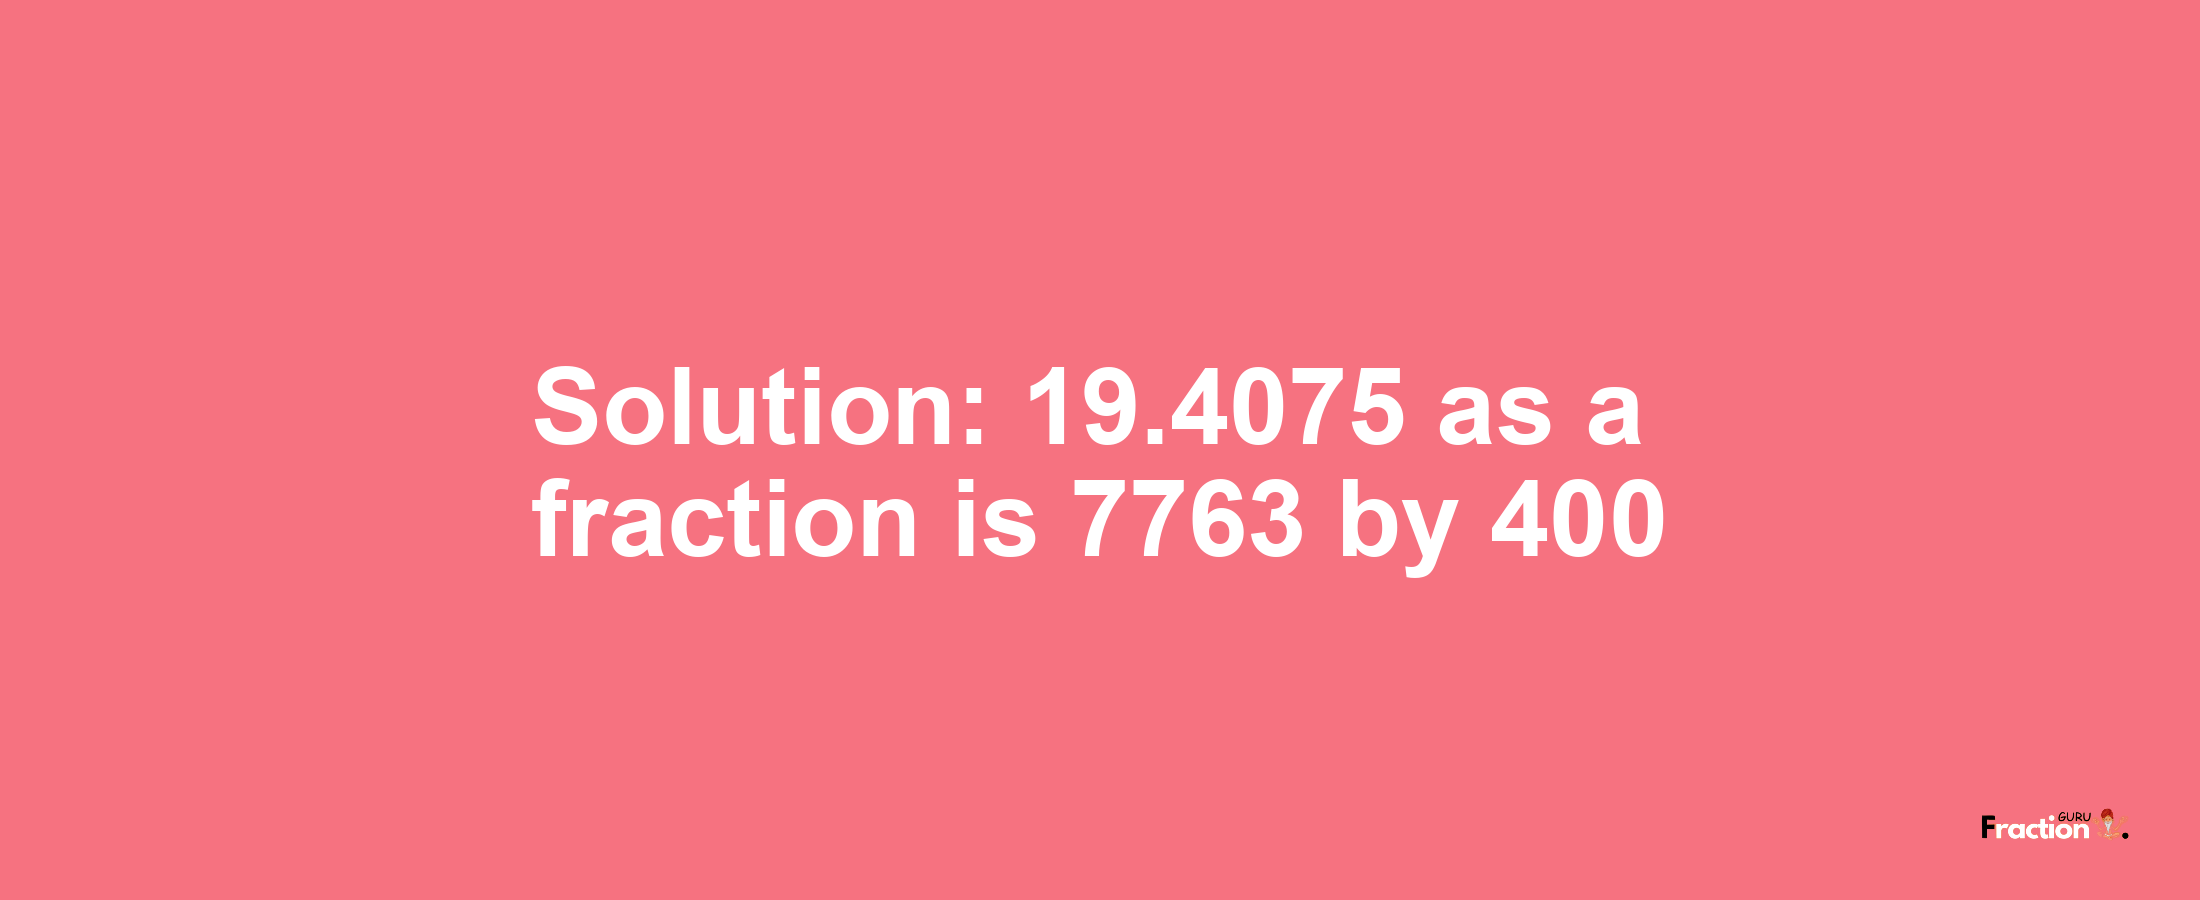 Solution:19.4075 as a fraction is 7763/400